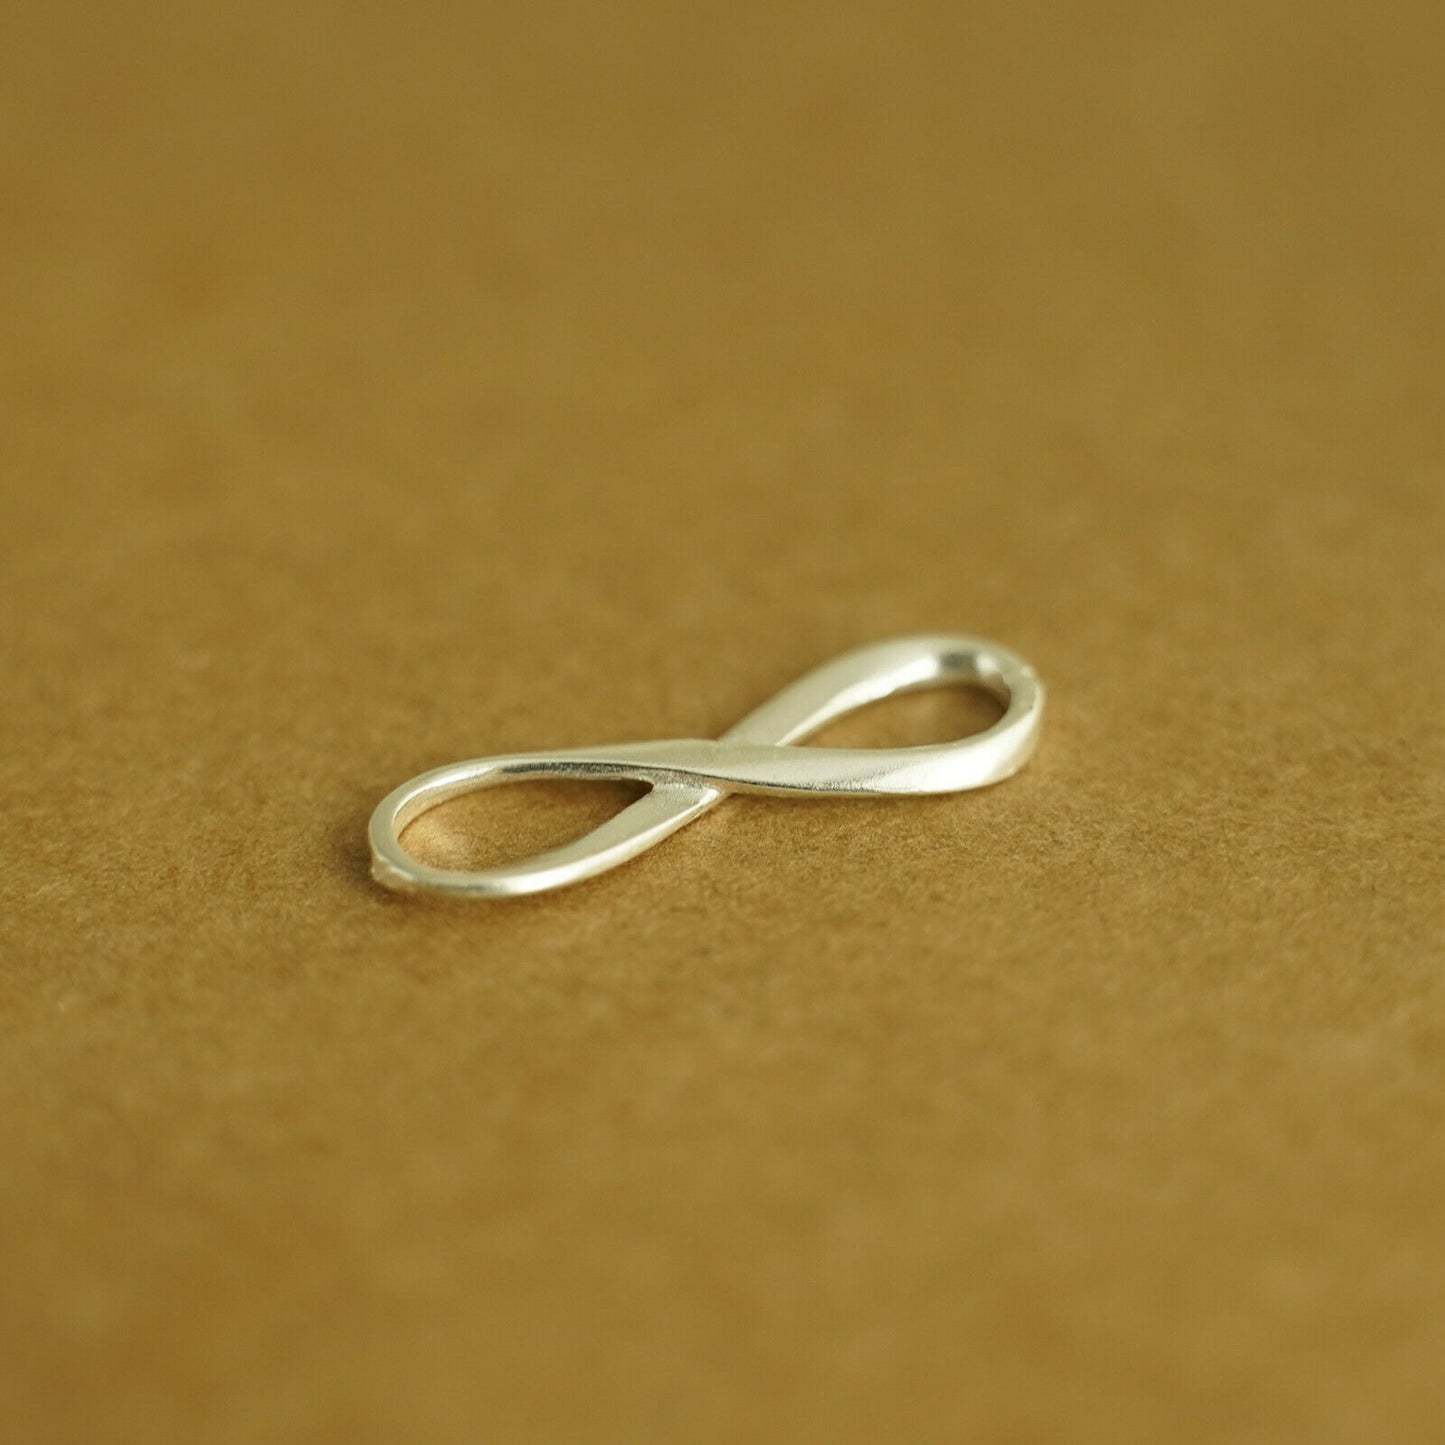 Infinity Pendant Sterling Silver for Necklace and Bracelet - sugarkittenlondon